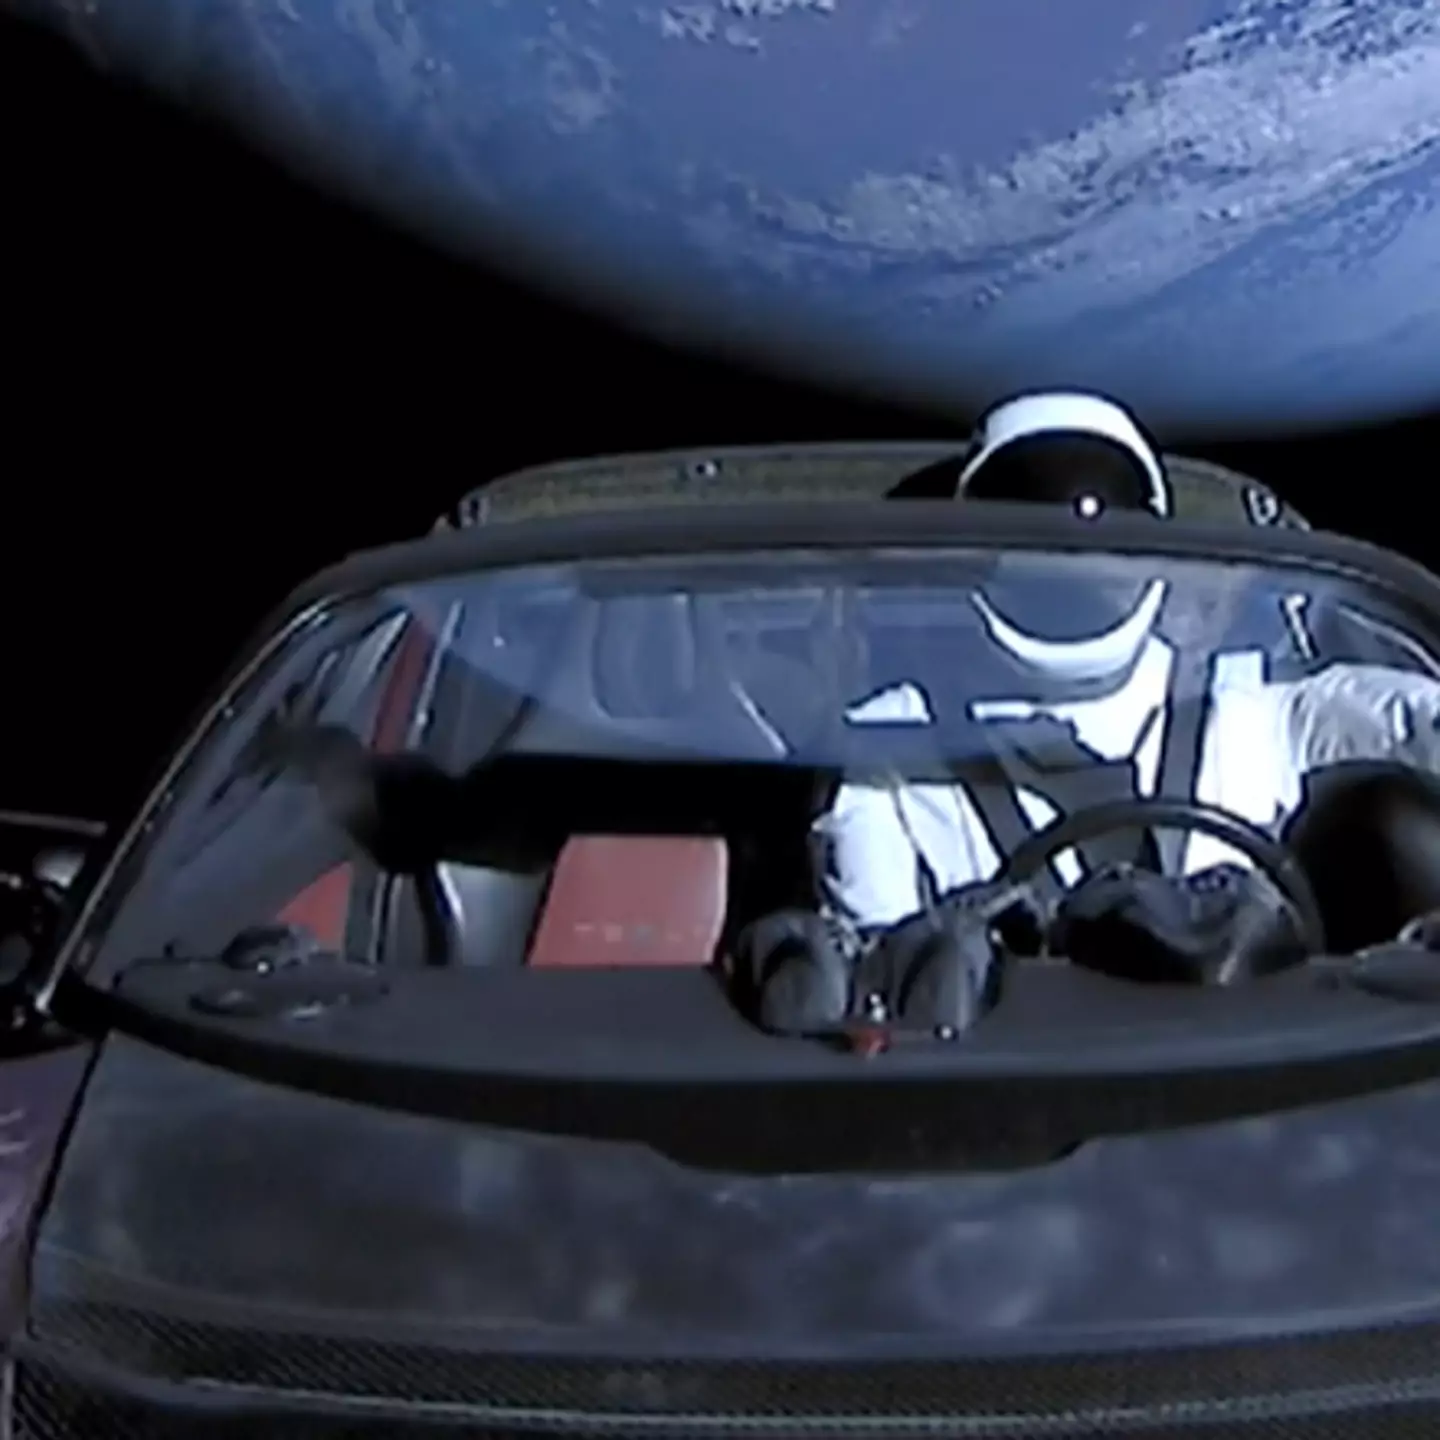 Here's where Elon Musk's Tesla he shot into space is now after 5 years